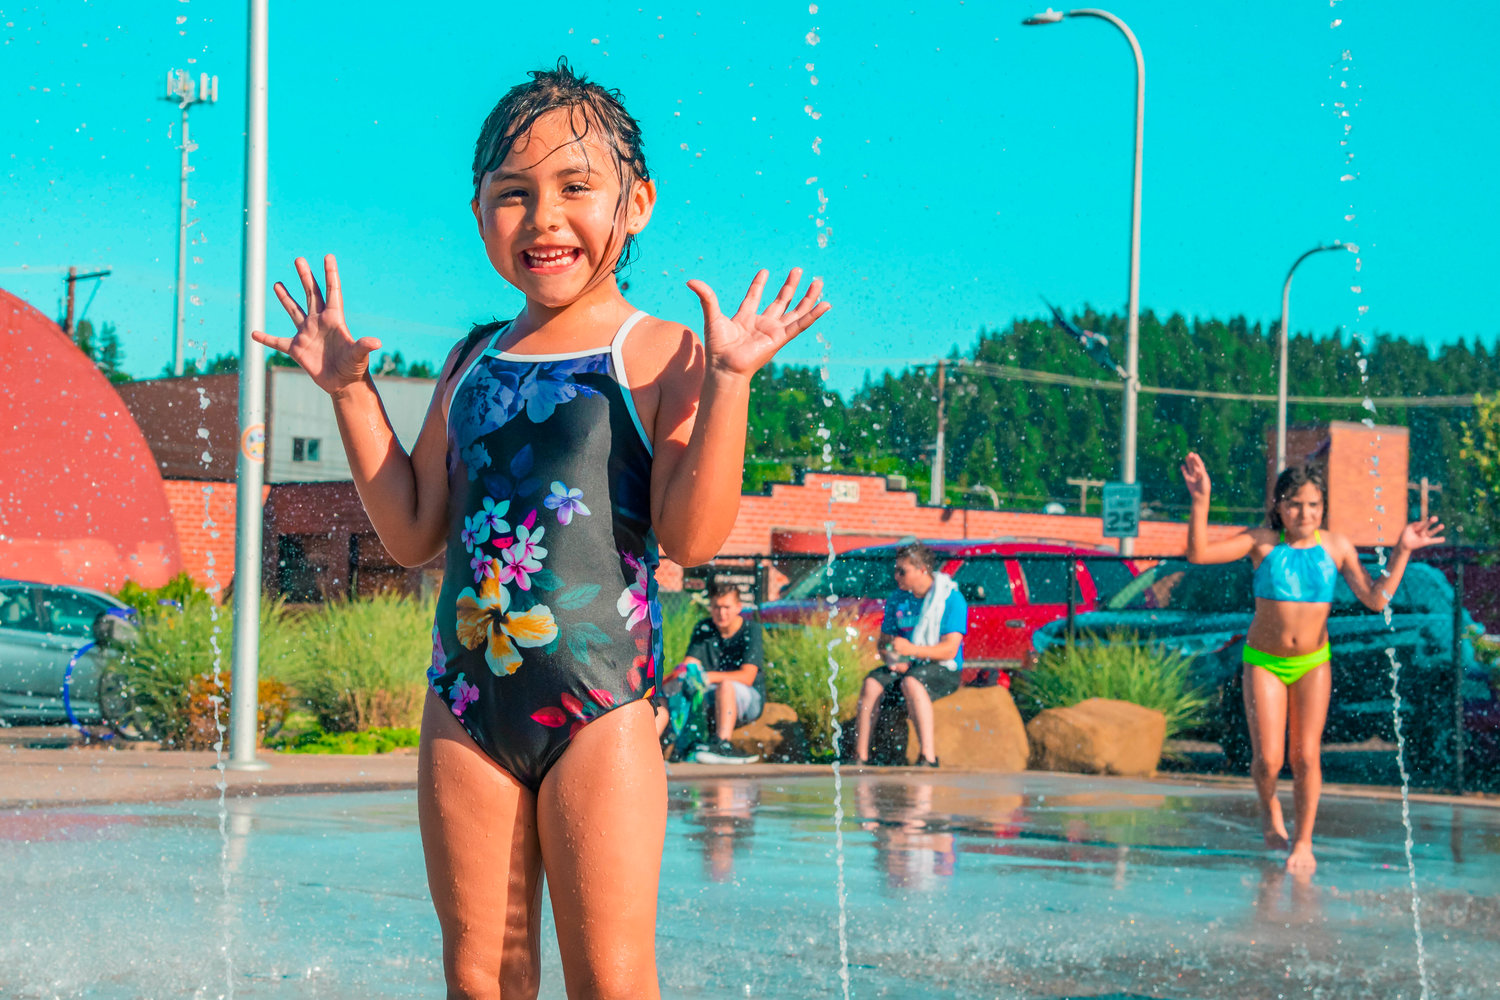 Luna Andablo smiles while playing in the Centralia splash park on Tuesday.